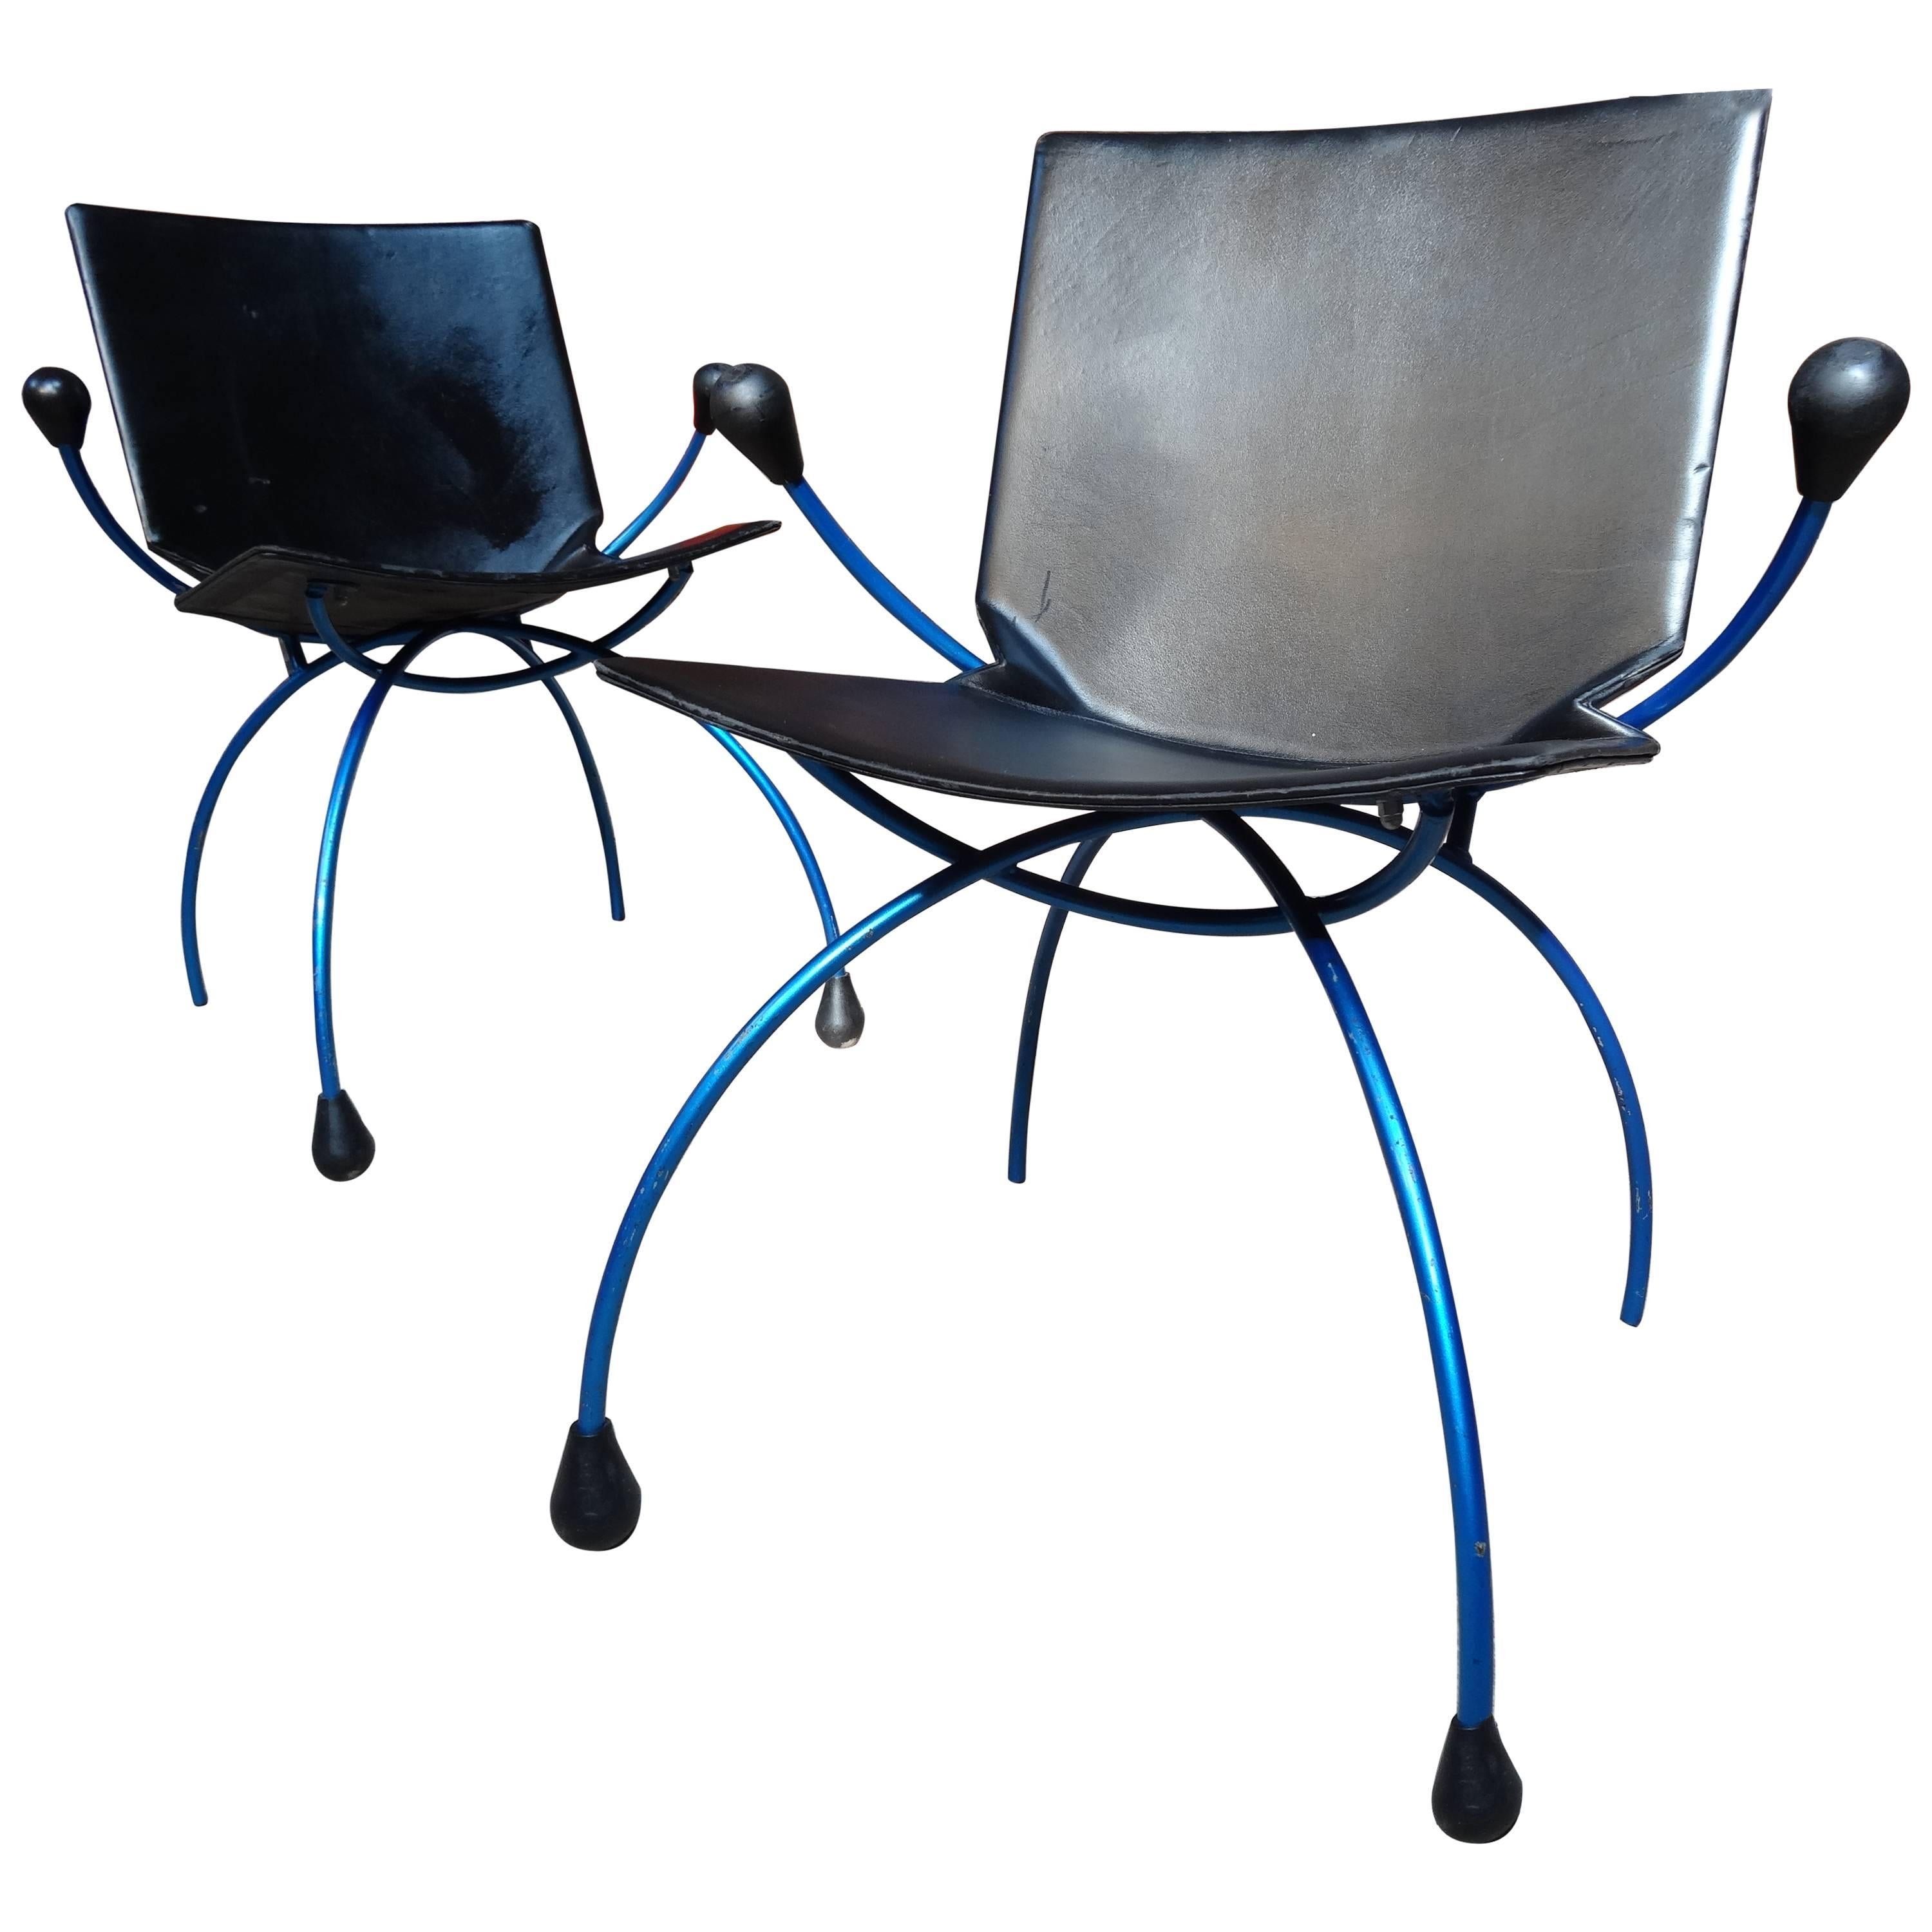 Two Blue Metal Framed 'Spider' Chairs